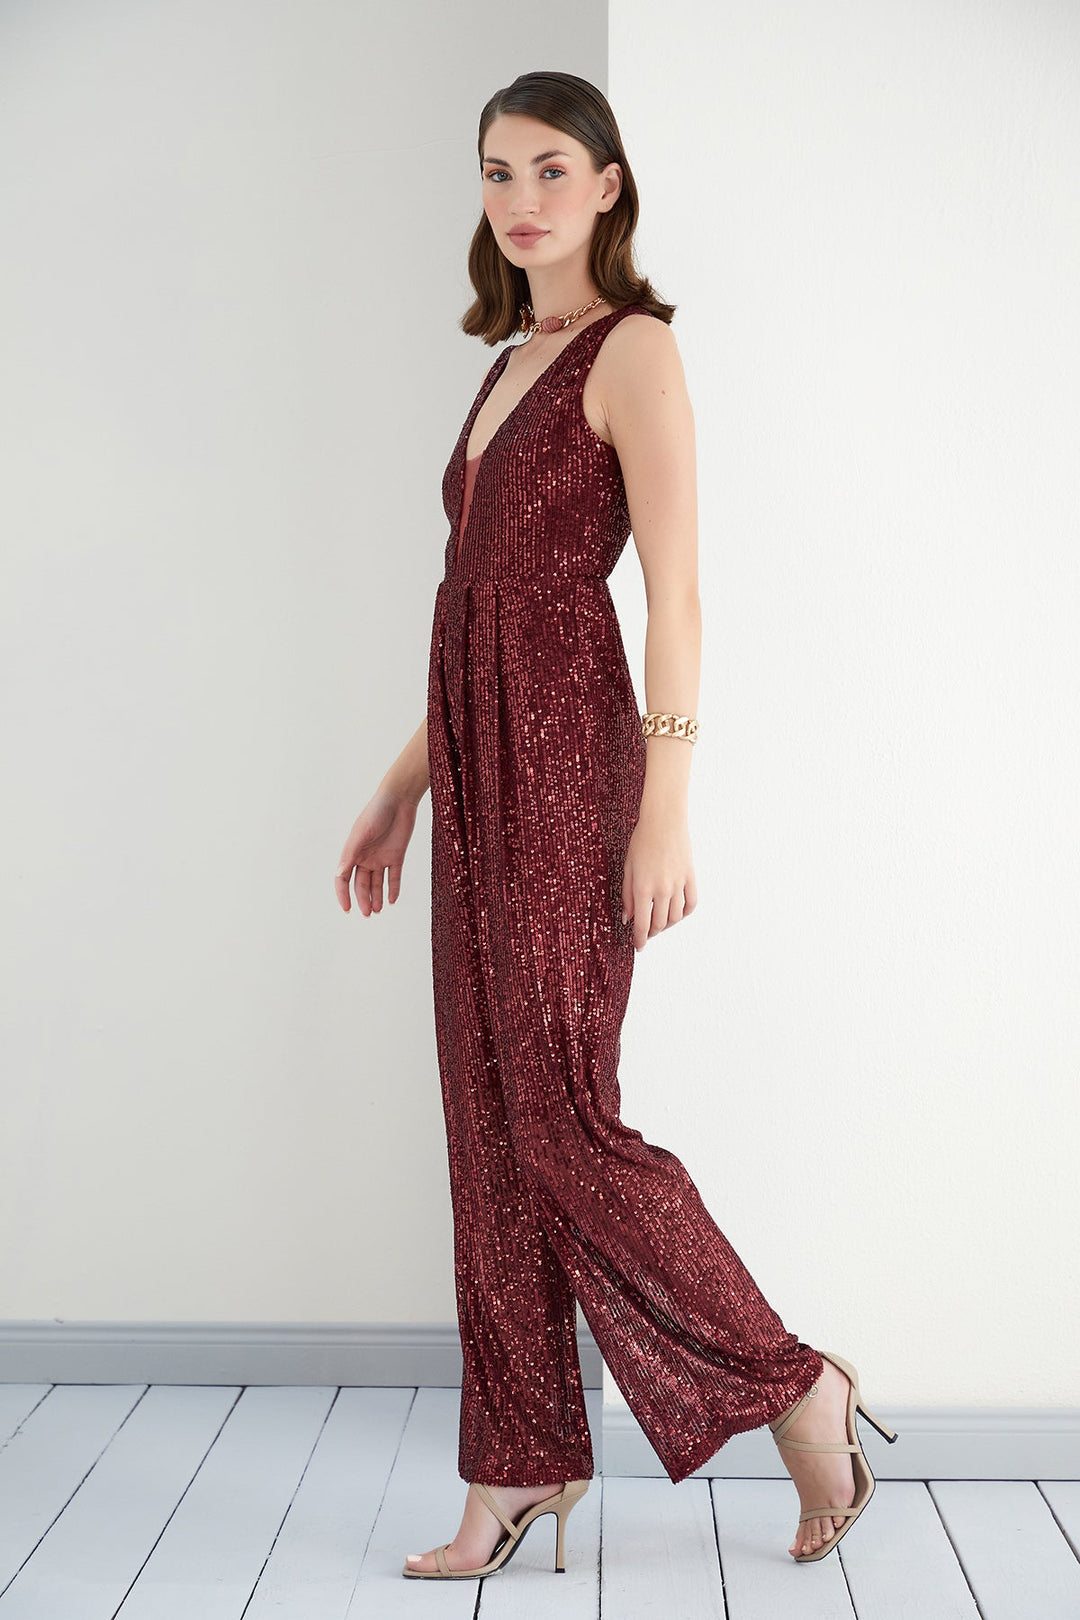 Sequin Sleeveless Maxi Wide Leg Jumpsuit in Burgundy - jqwholesale.com